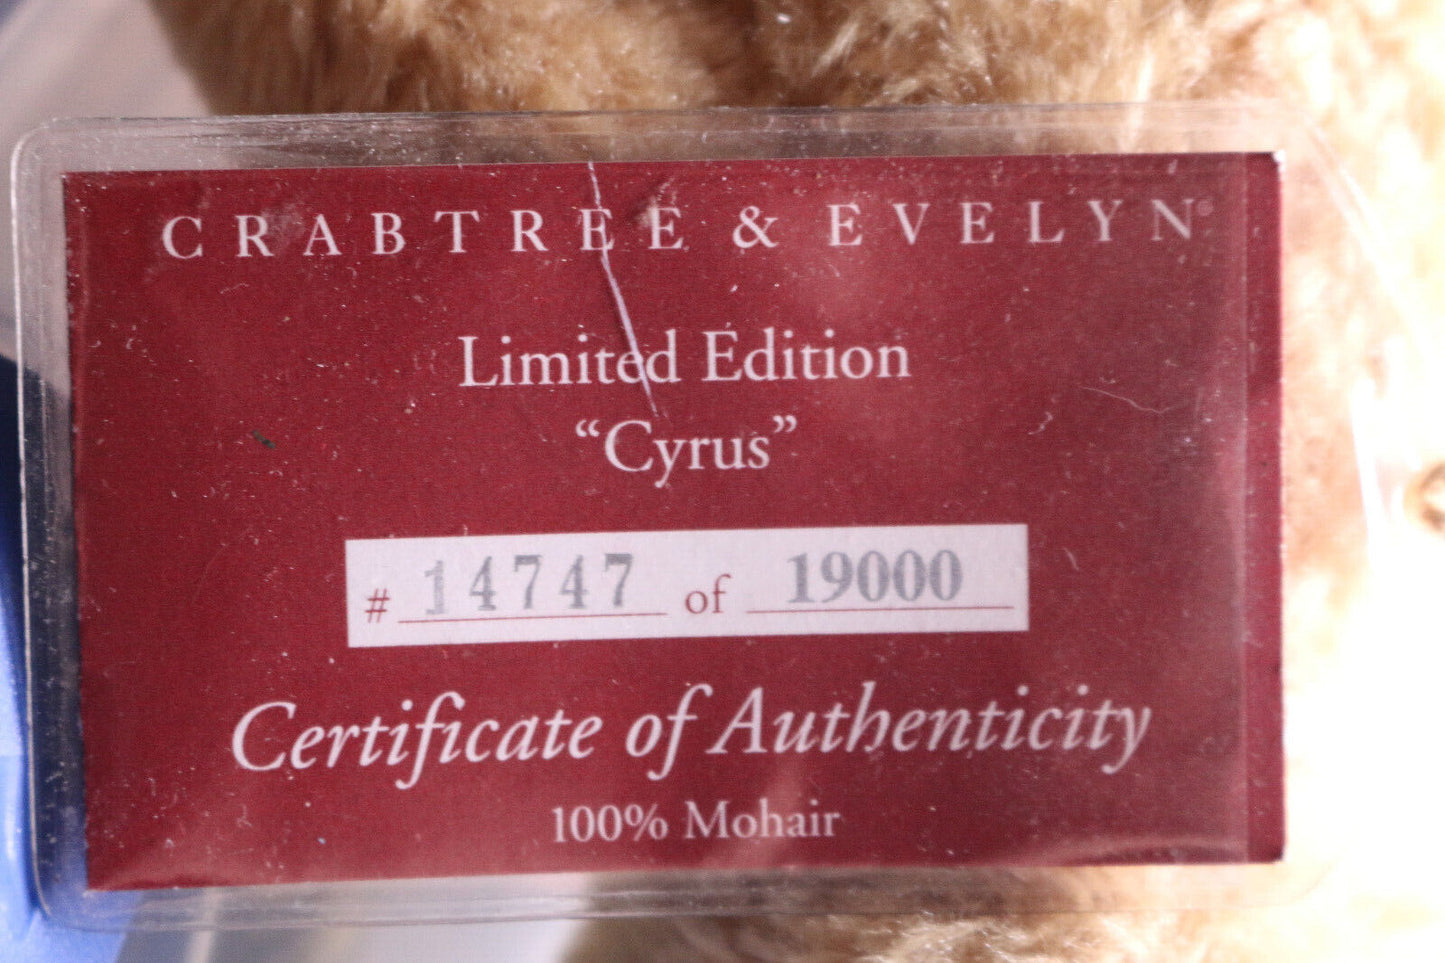 ⭐️Crabtree & Evelyn 100% Mohair Cyrus Jointed Limited Edition Teddy Bear W/ Tags